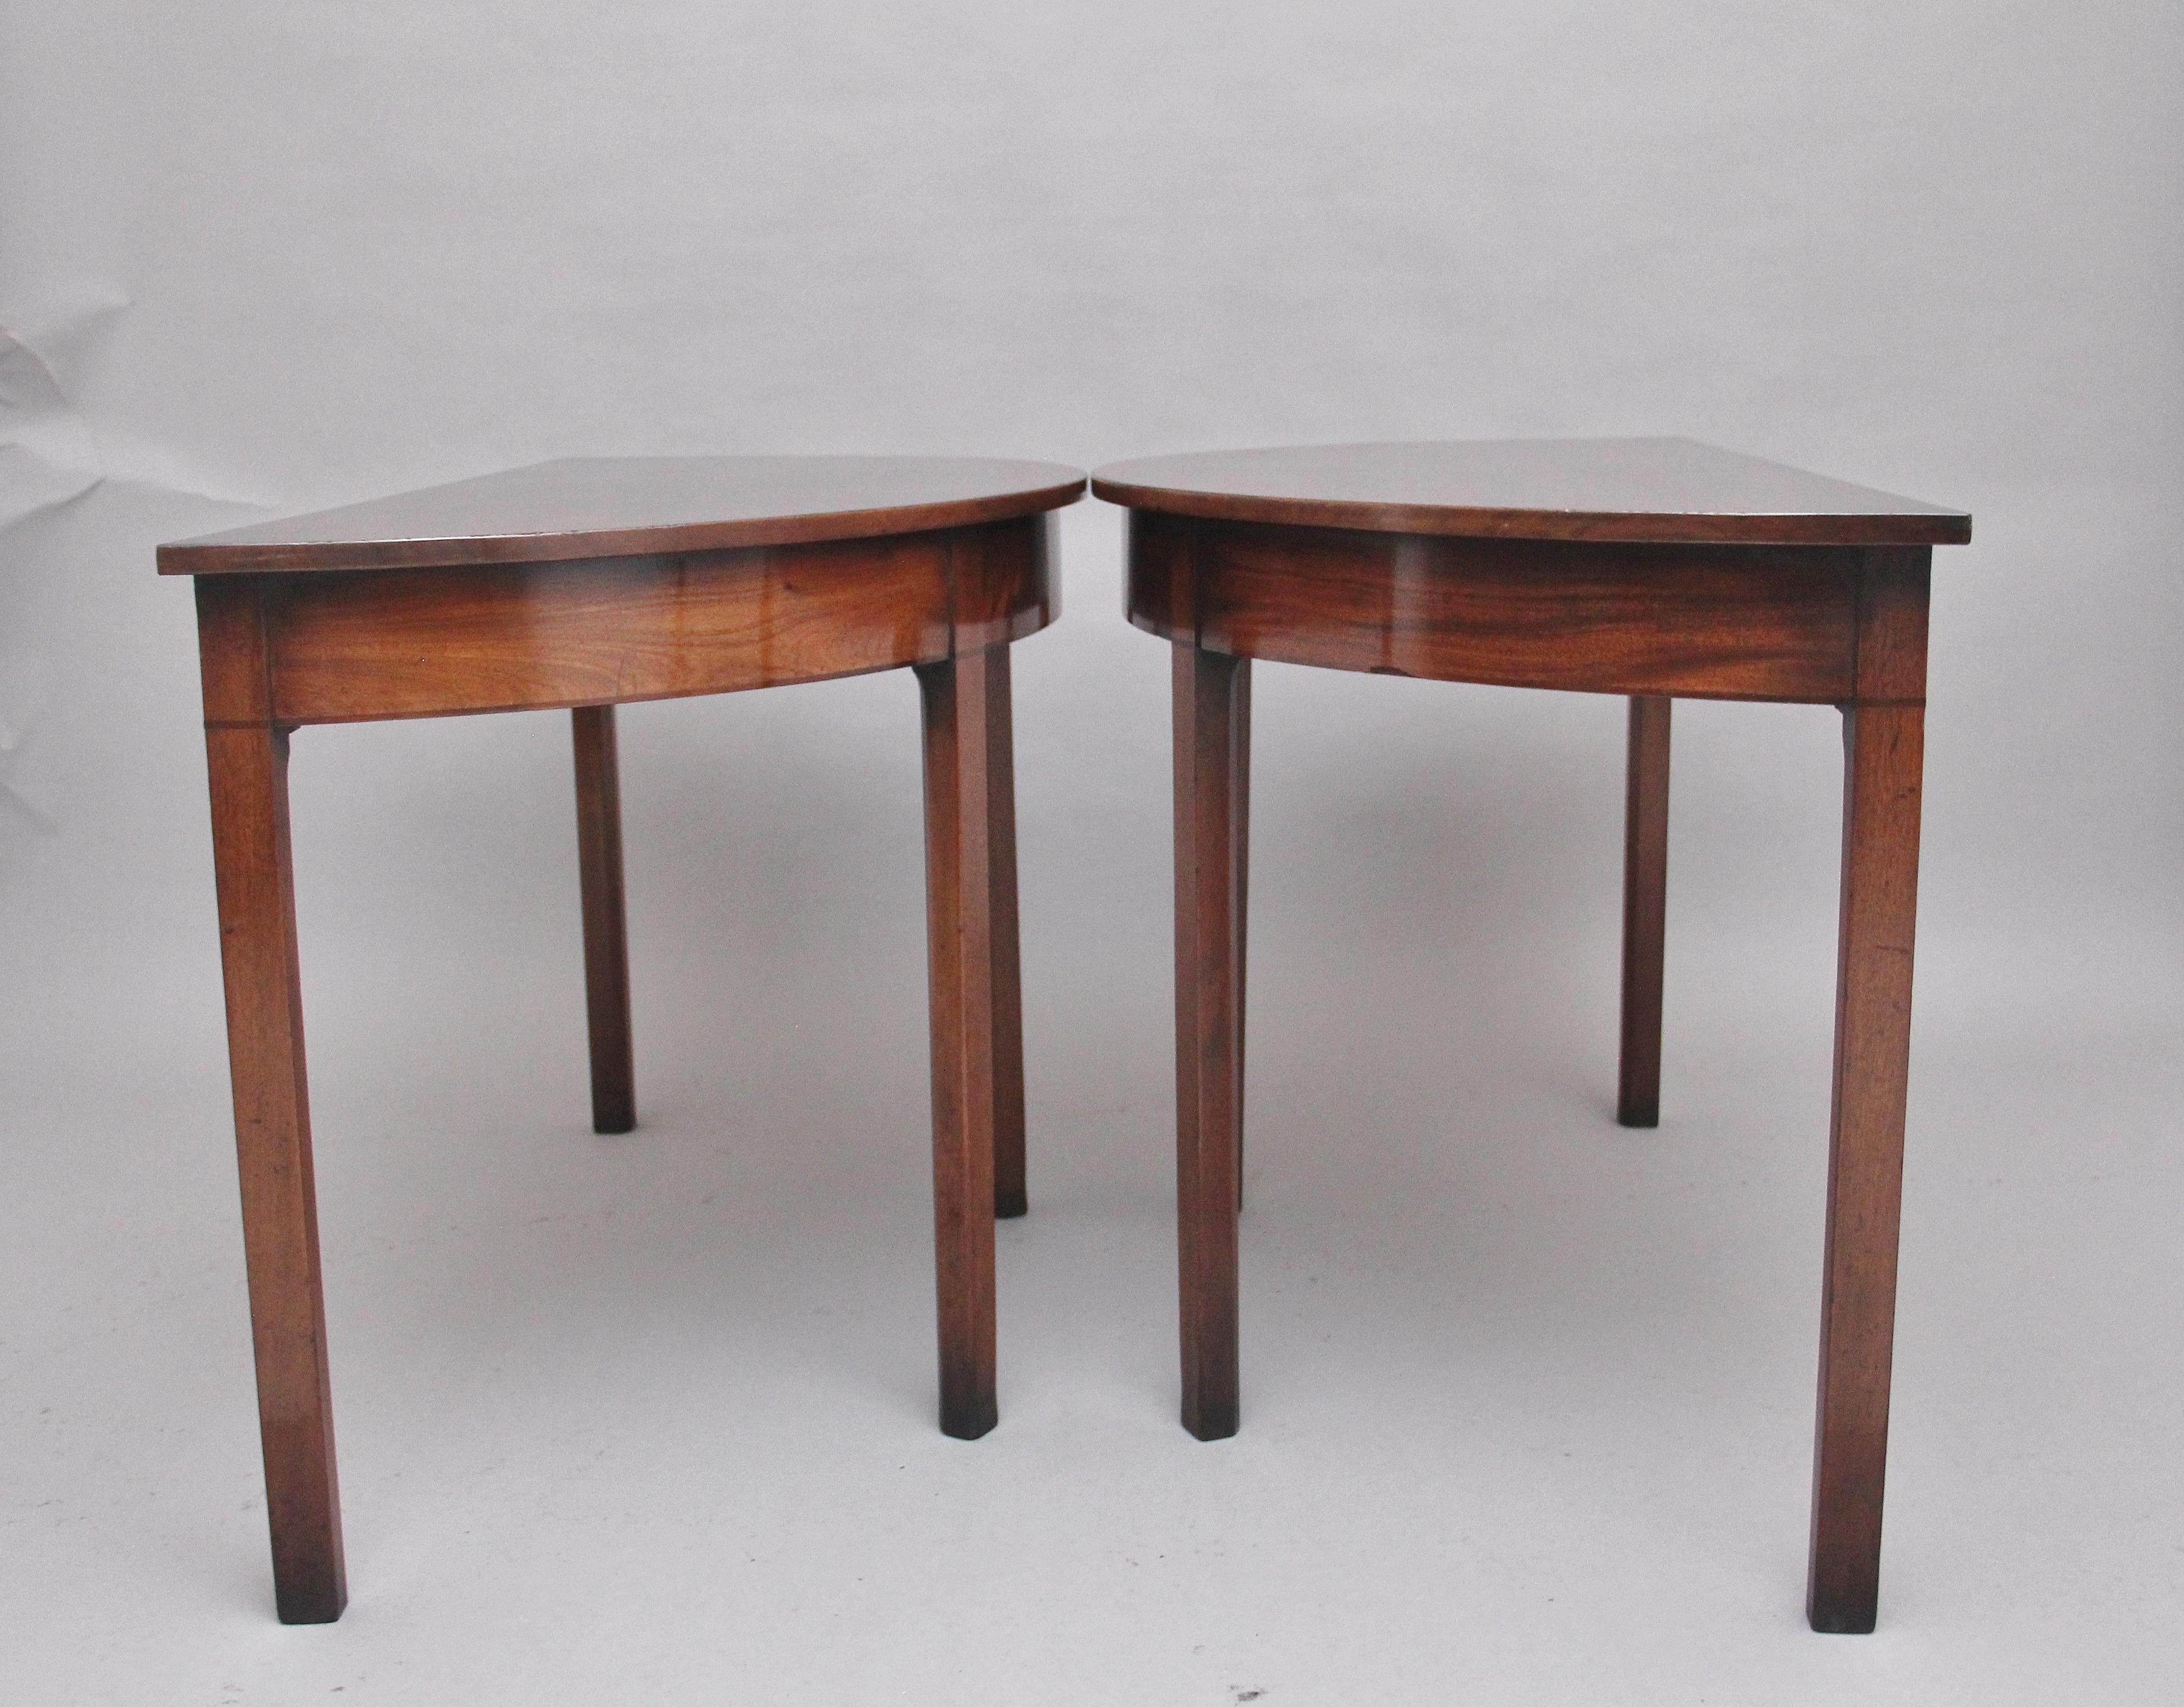 British Pair of Early 19th Century Mahogany Demi Lune Console Tables